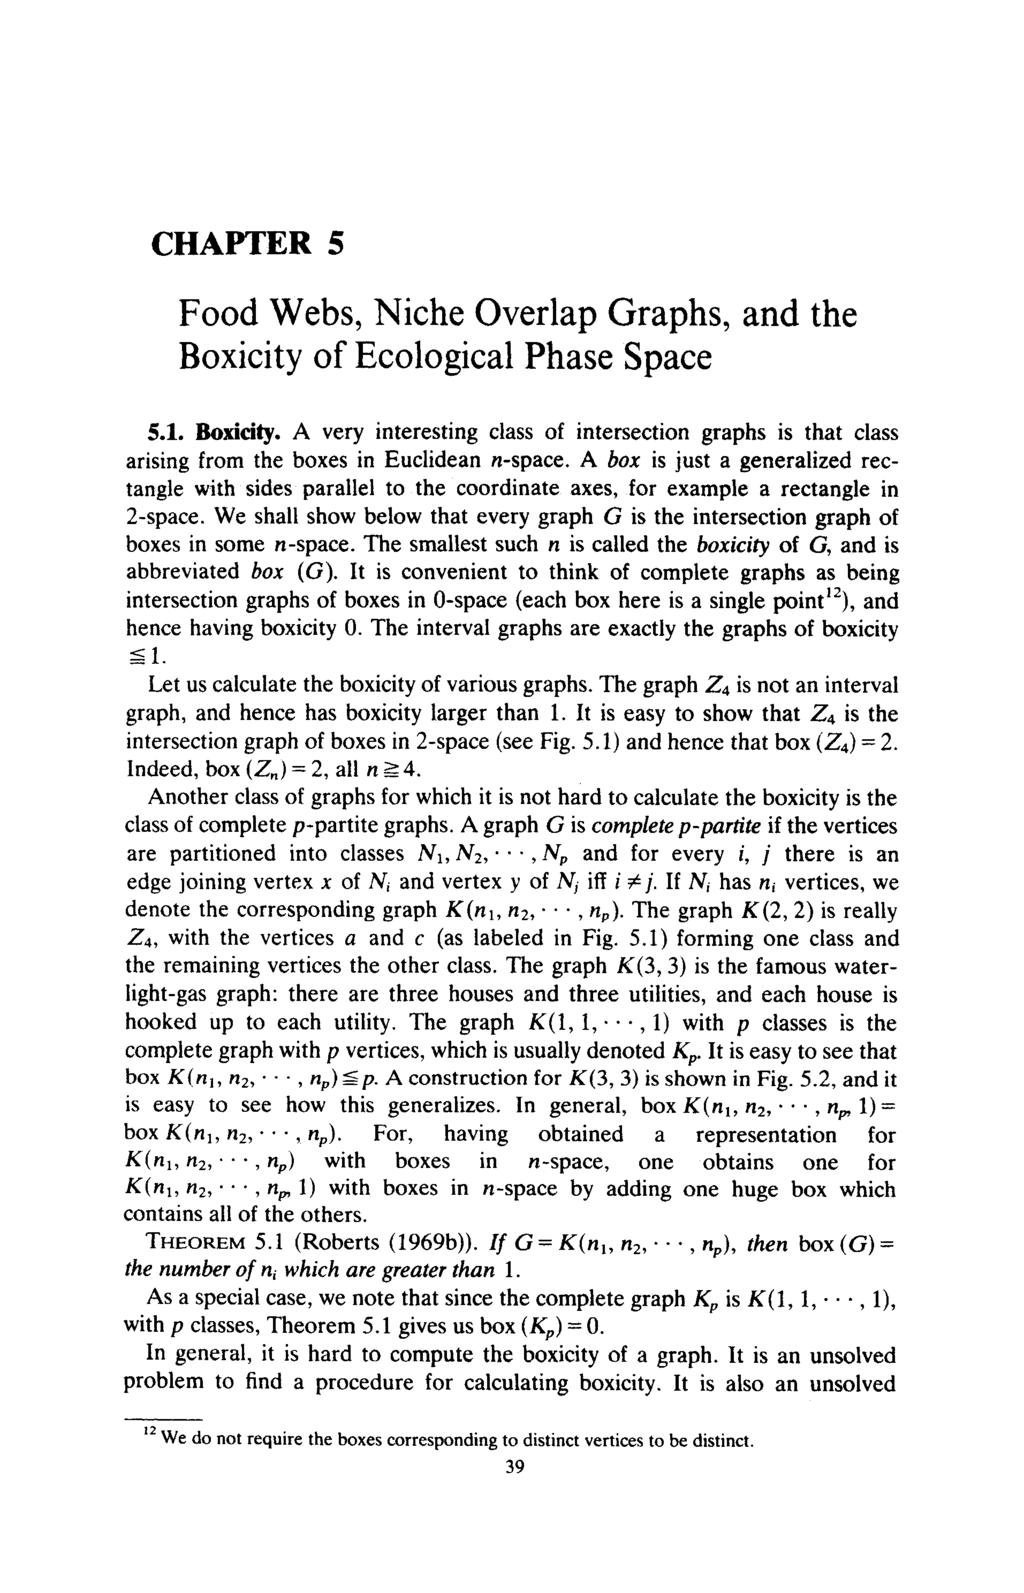 CHAPTER 5 Food Webs, Niche Overlap Graphs, and the Boxicity of Ecological Phase Space 5.1. Boxicity. A very interesting class of intersection graphs is that class arising from the boxes in Euclidean n-space.